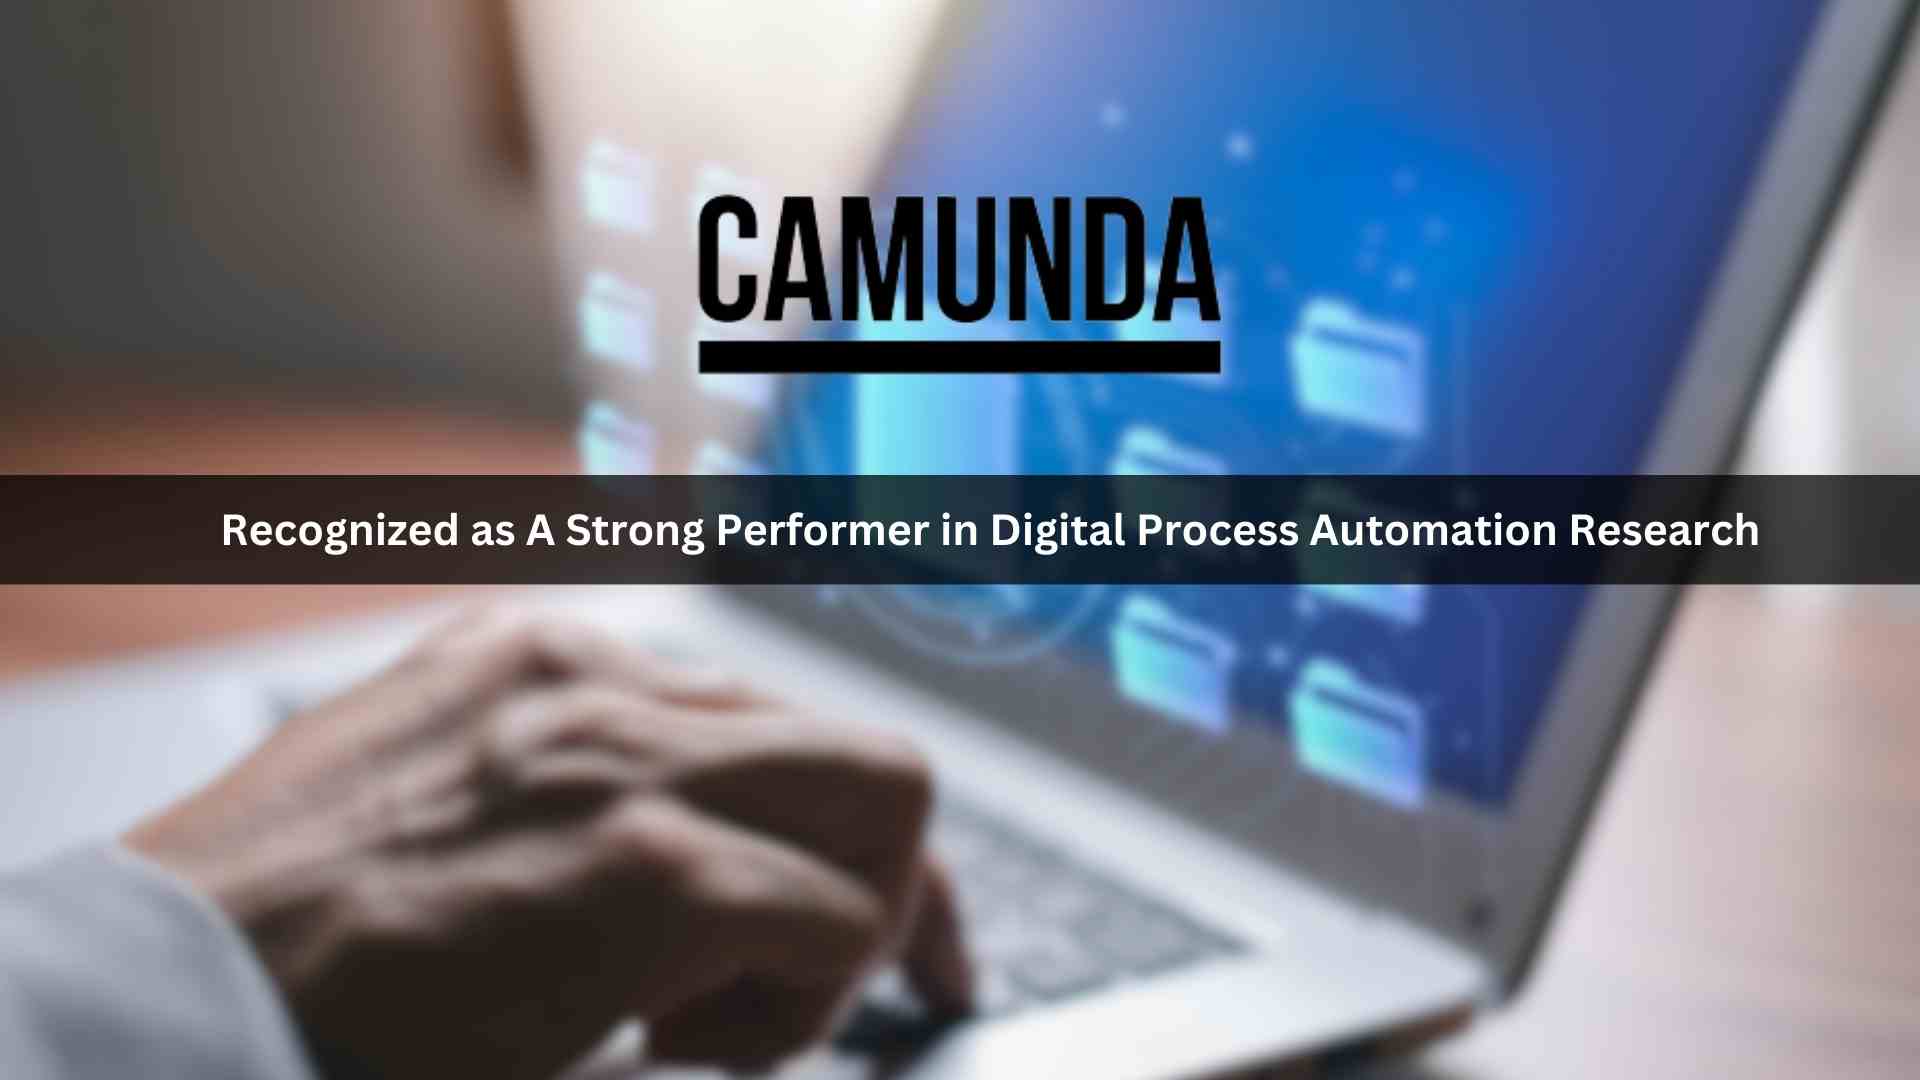 Camunda Recognized as A Strong Performer in Digital Process Automation Research